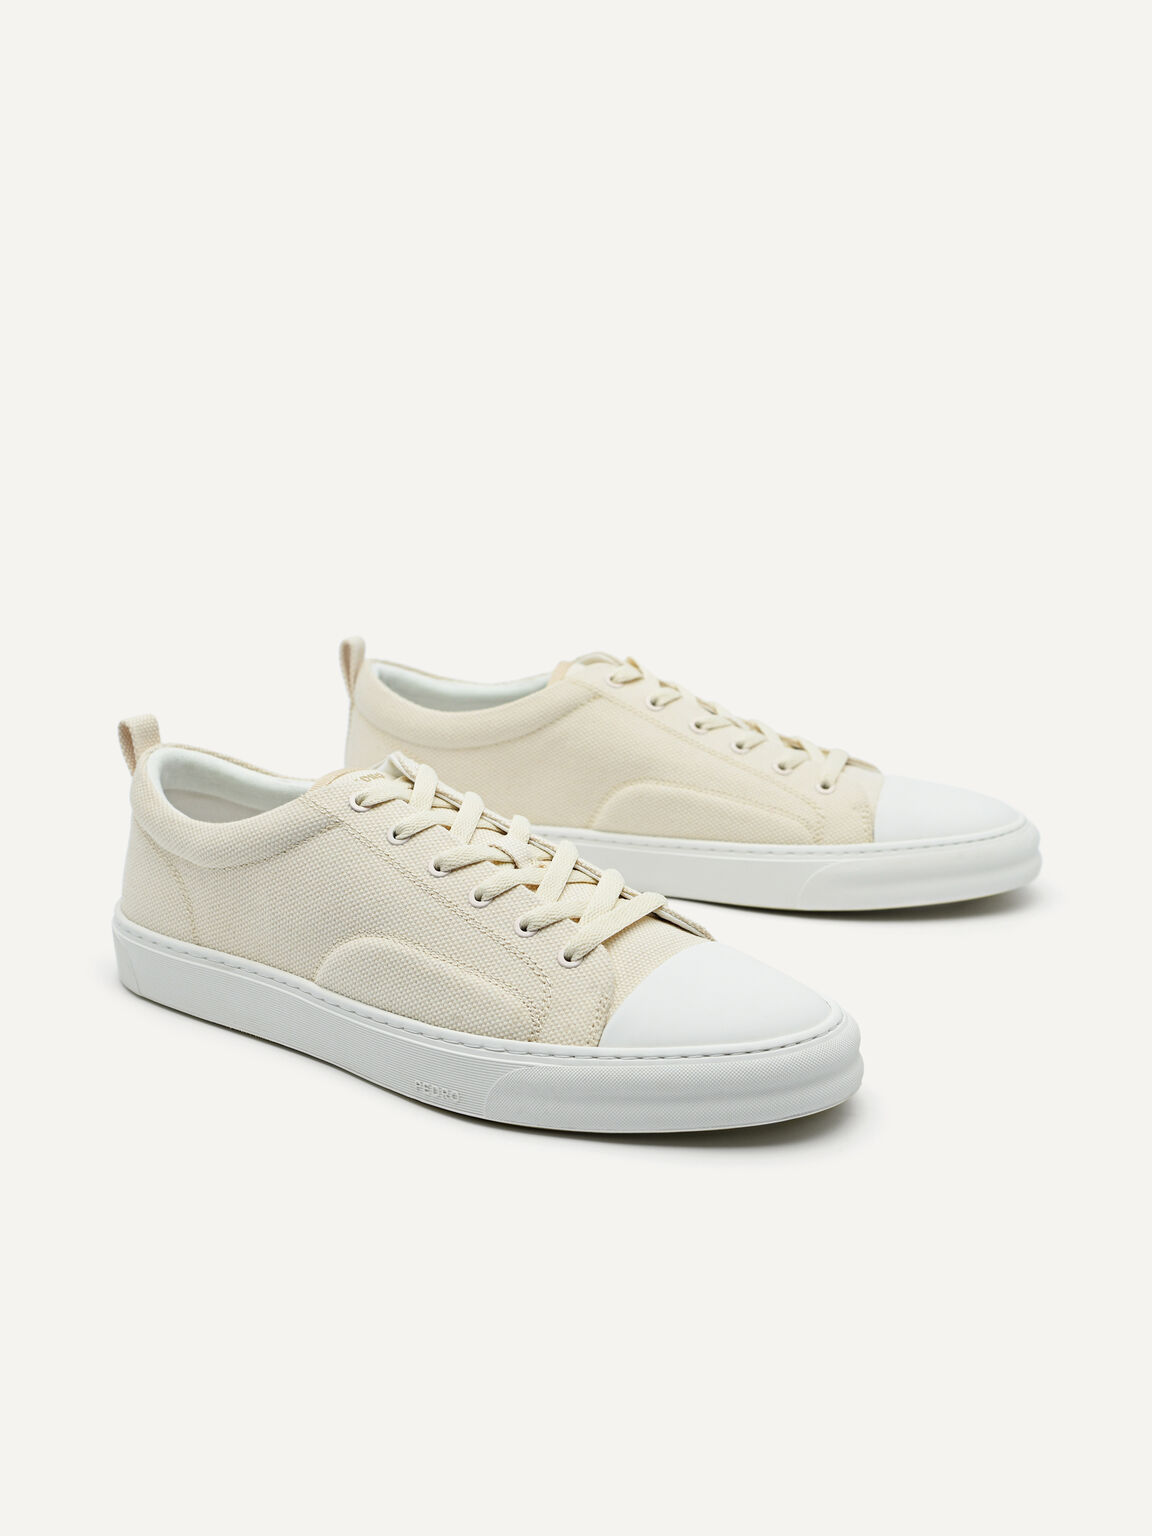 Lace-Up Sneakers, Beige